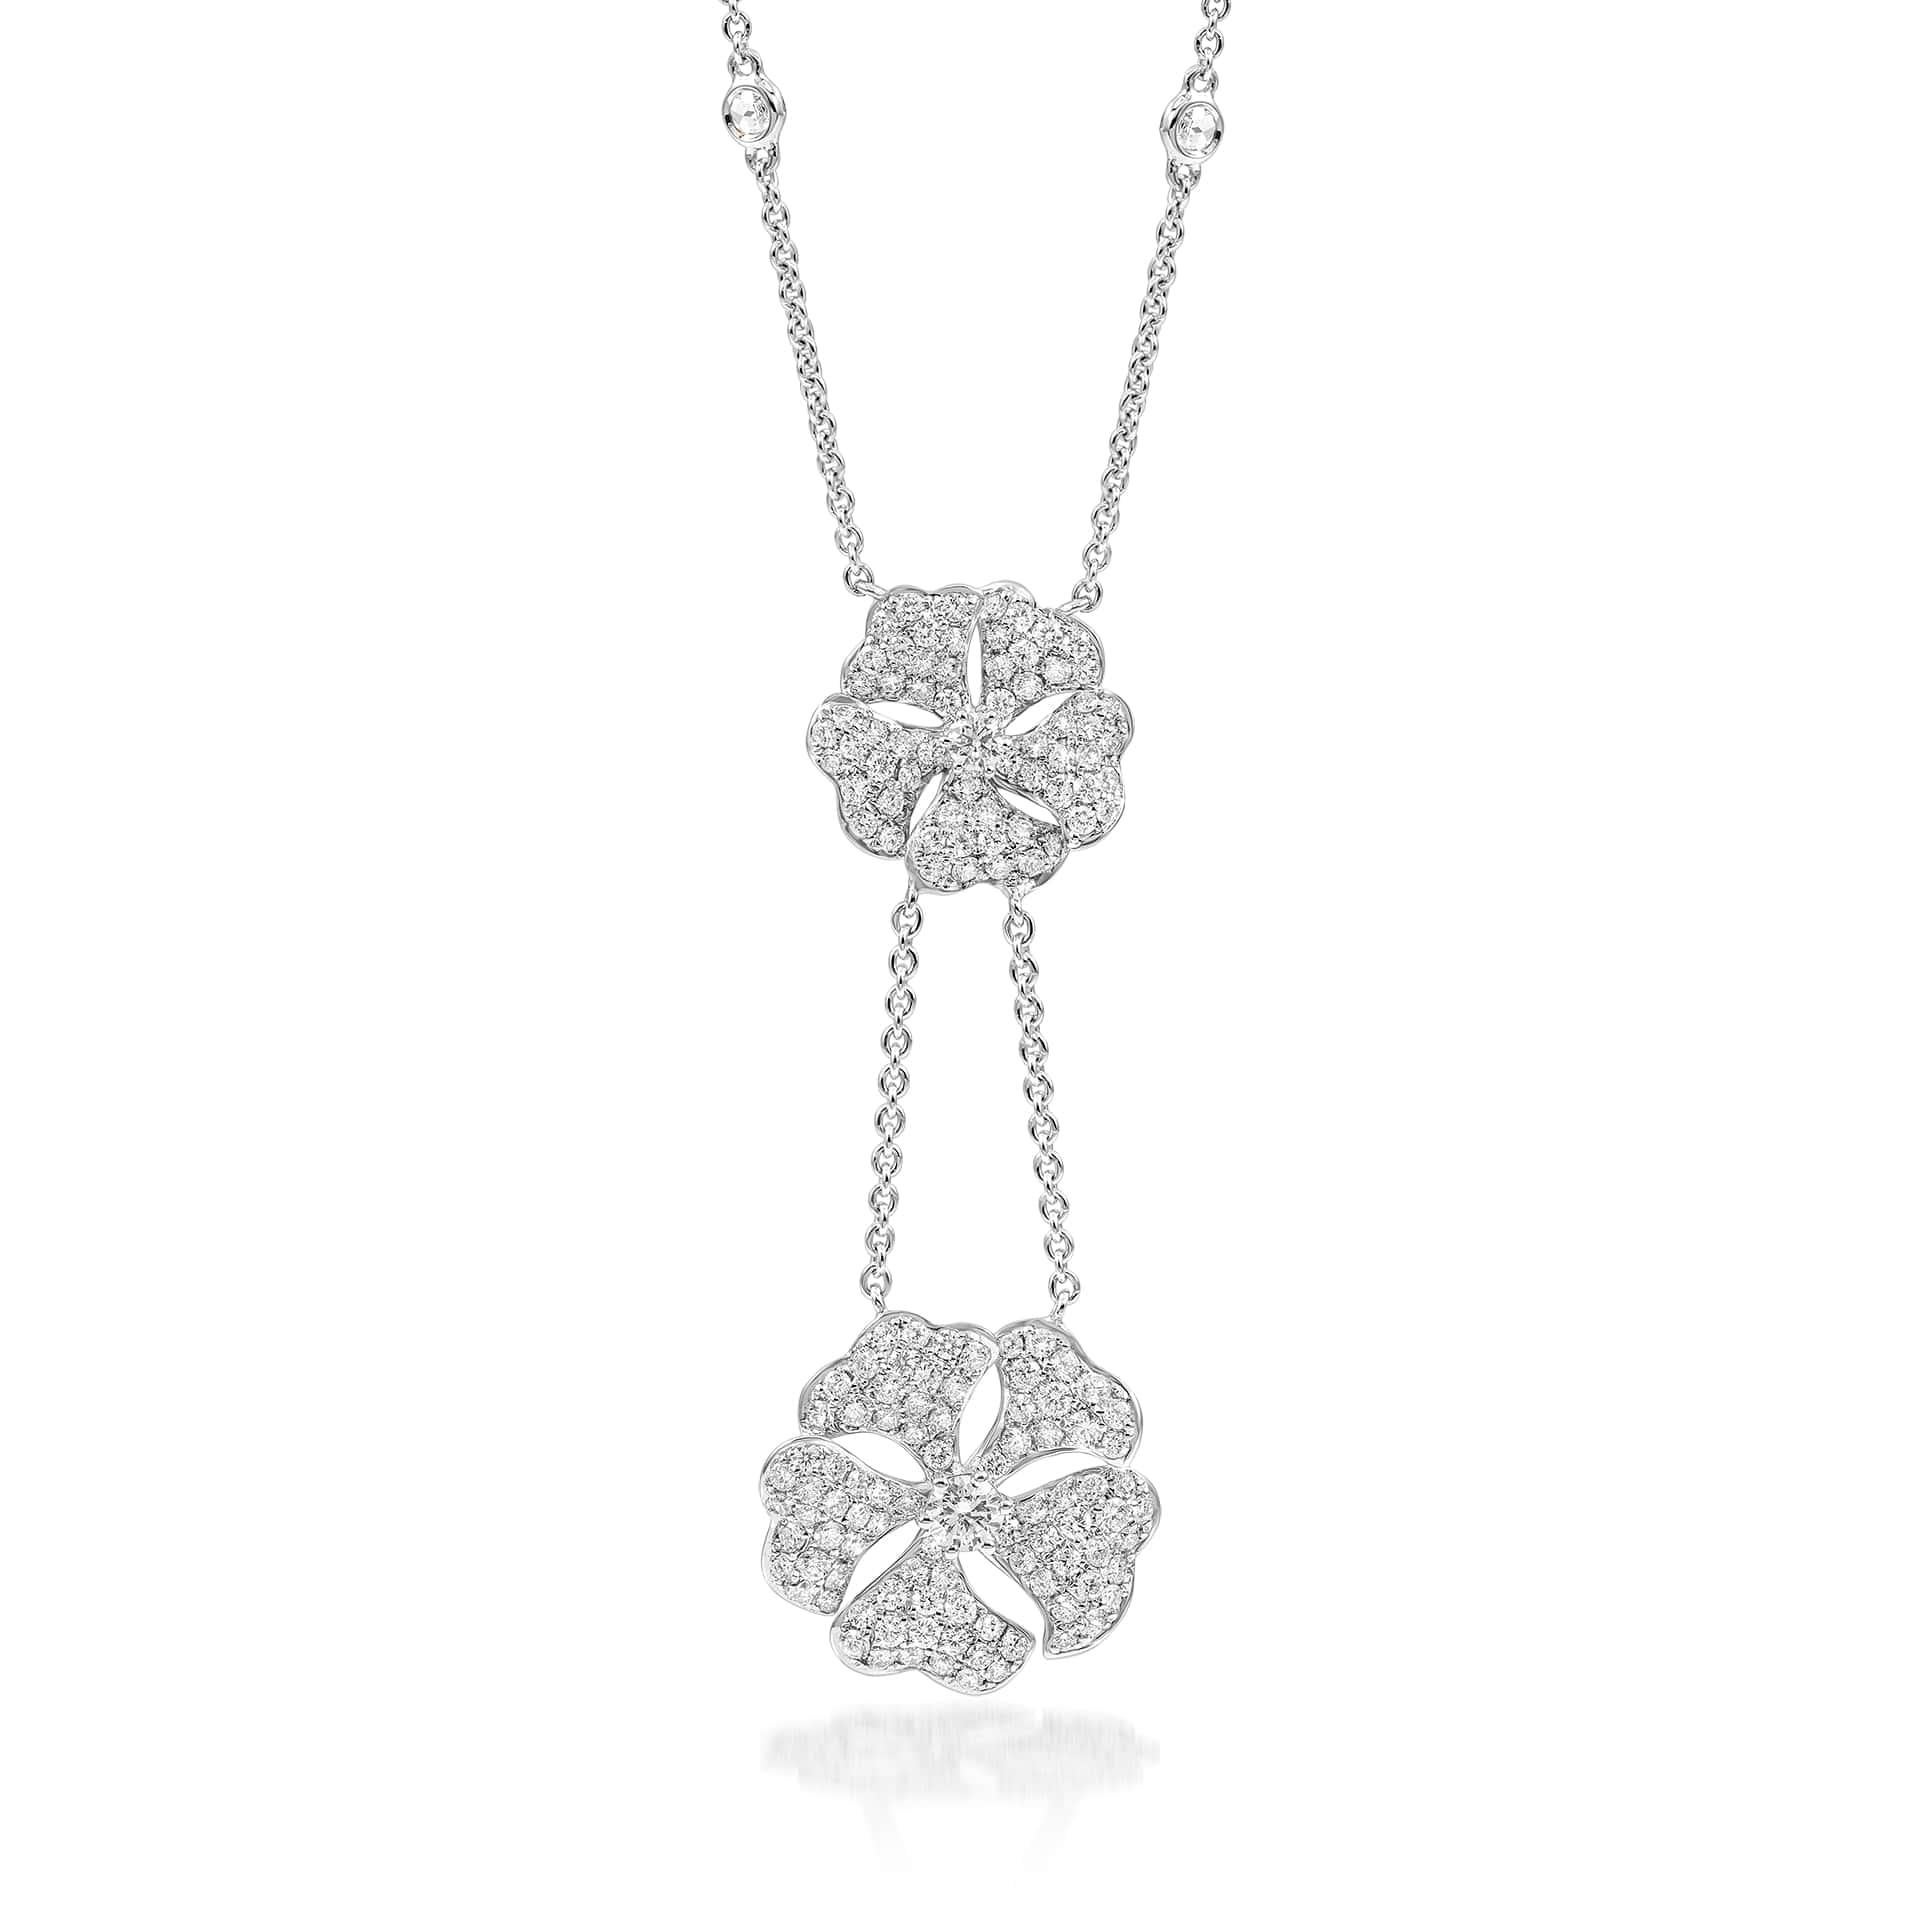 Bloom Diamond Drop Flower Necklace in 18K White Gold

Inspired by the exquisite petals of the alpine cinquefoil flower, the Bloom collection combines the richness of diamonds and precious metals with the light versatility of this delicate,